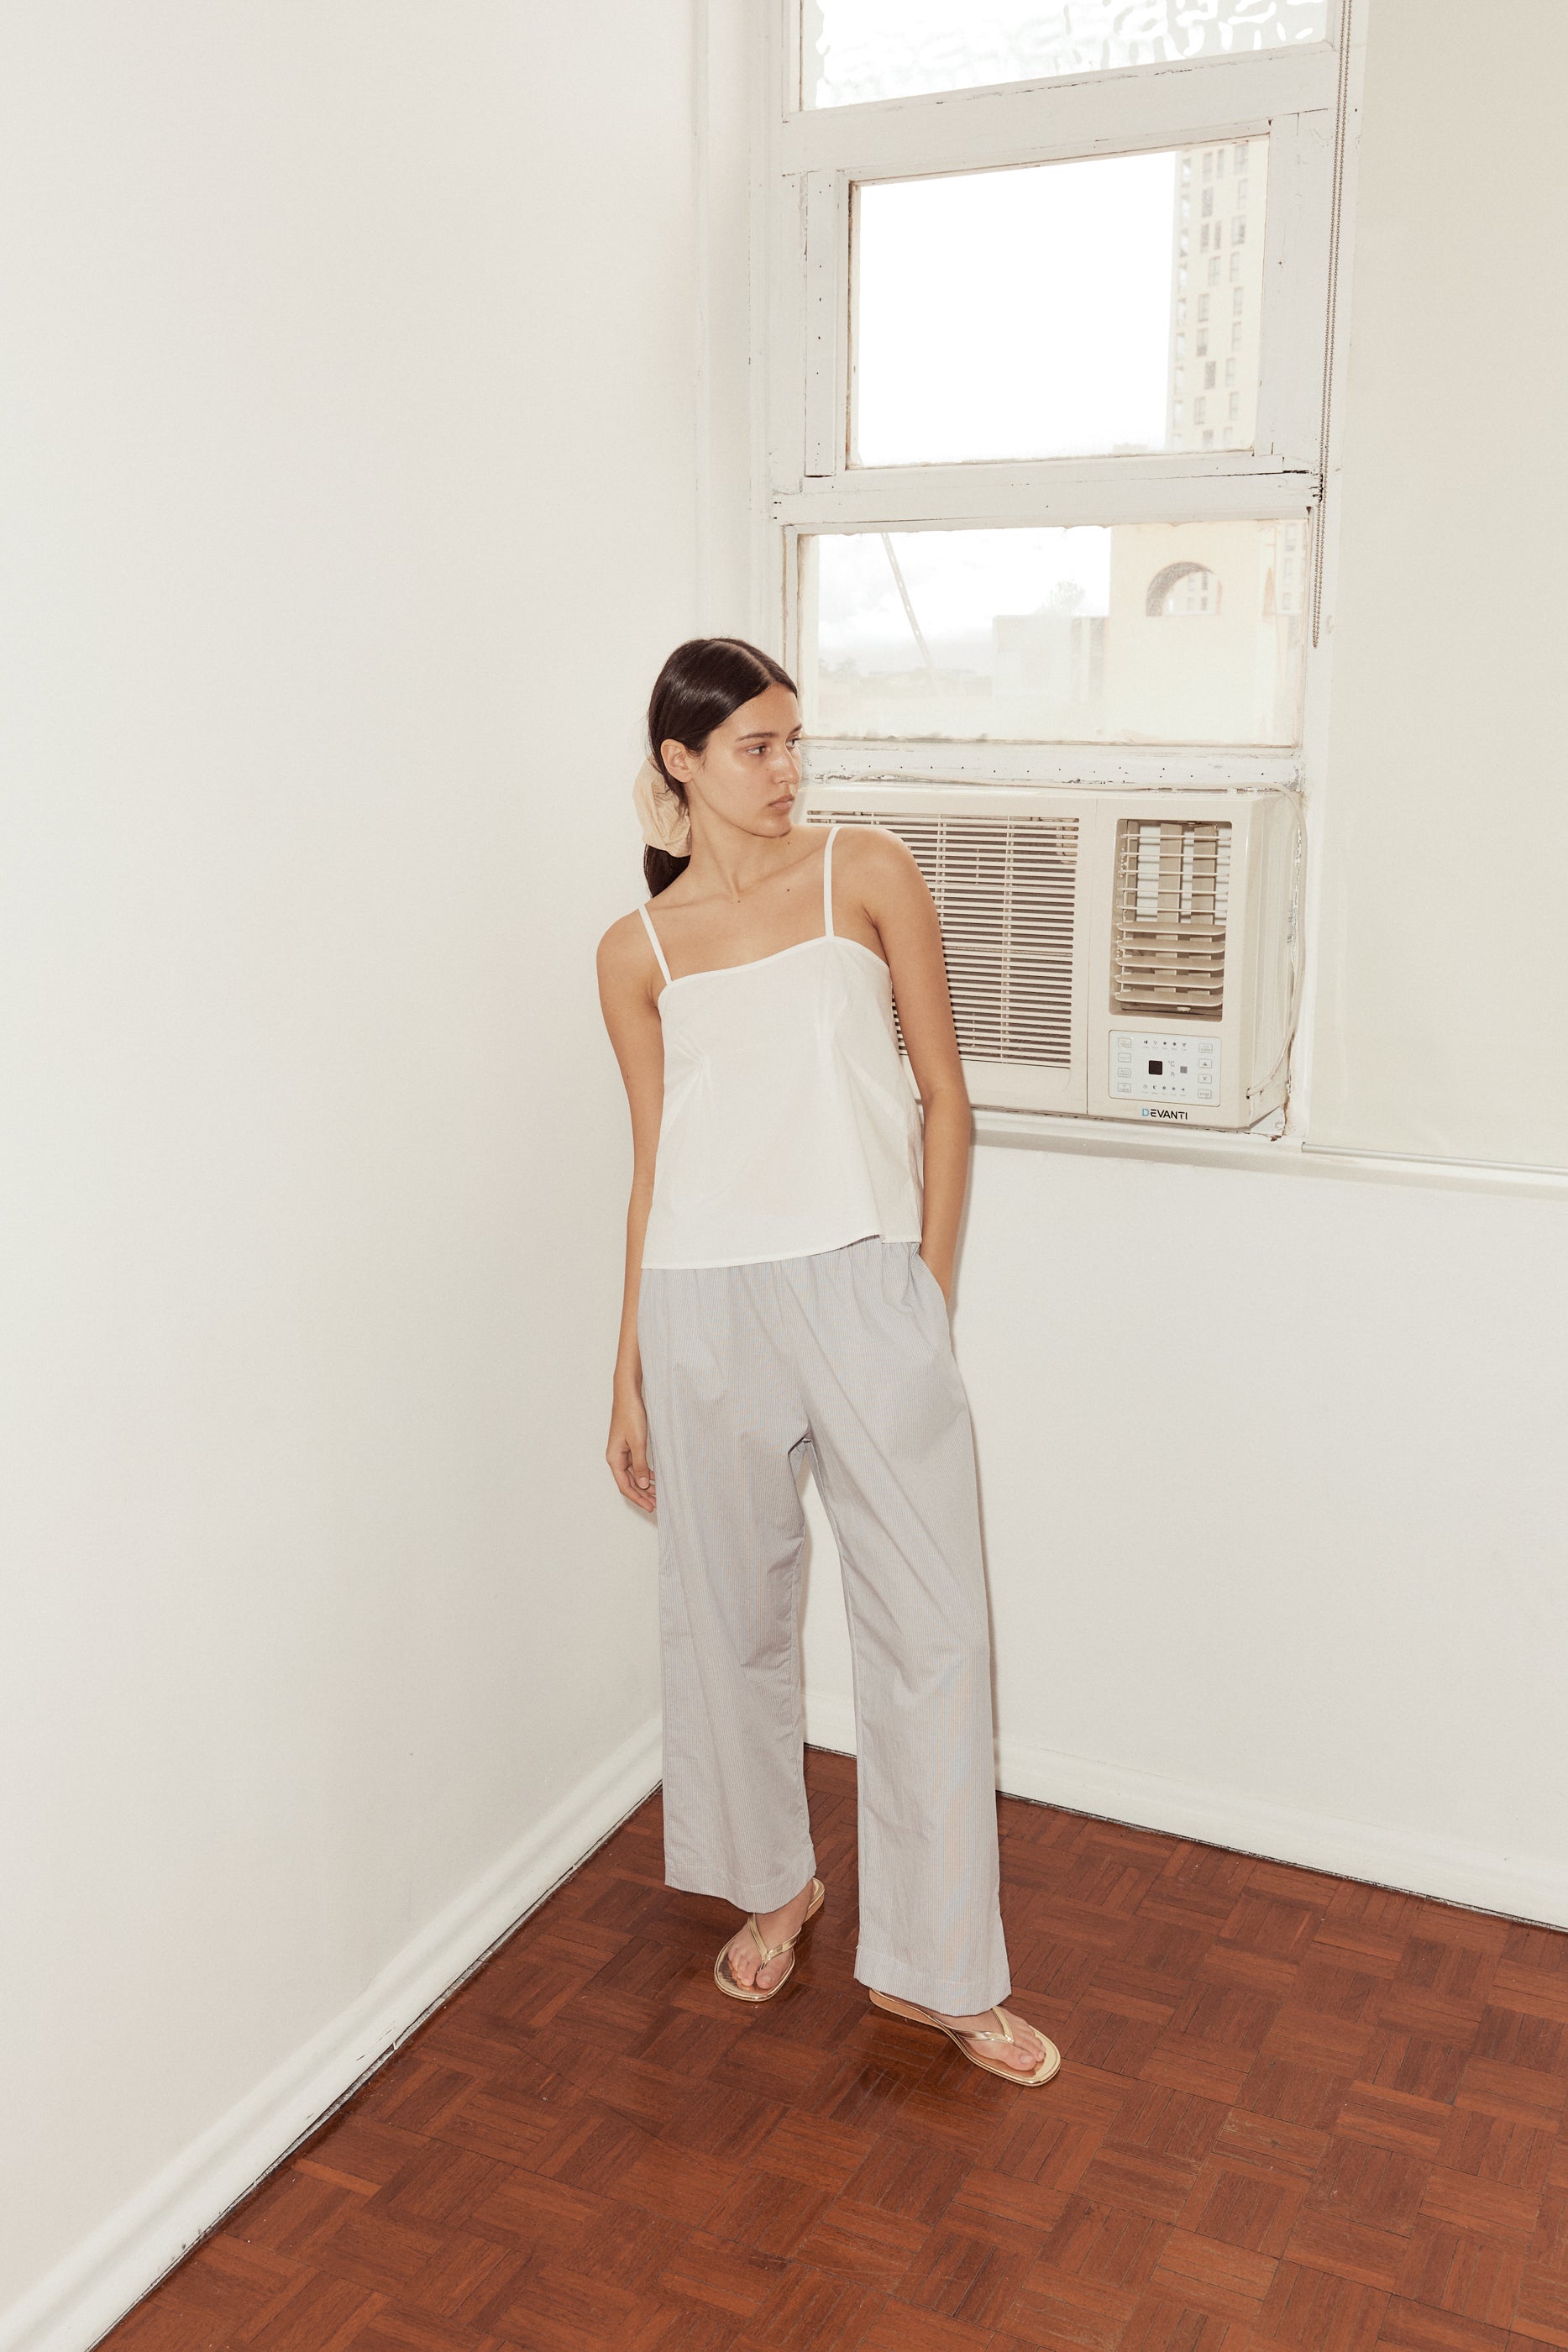 female model wears the Deiji Studios Ease Trouser in Dream Stripe, a soft blue micro stripe trouser in organic cotton poplin. Features side pockets, a relaxed leg and soft elastic waist. Styled with the Deiji Studios Pleat Top in white.